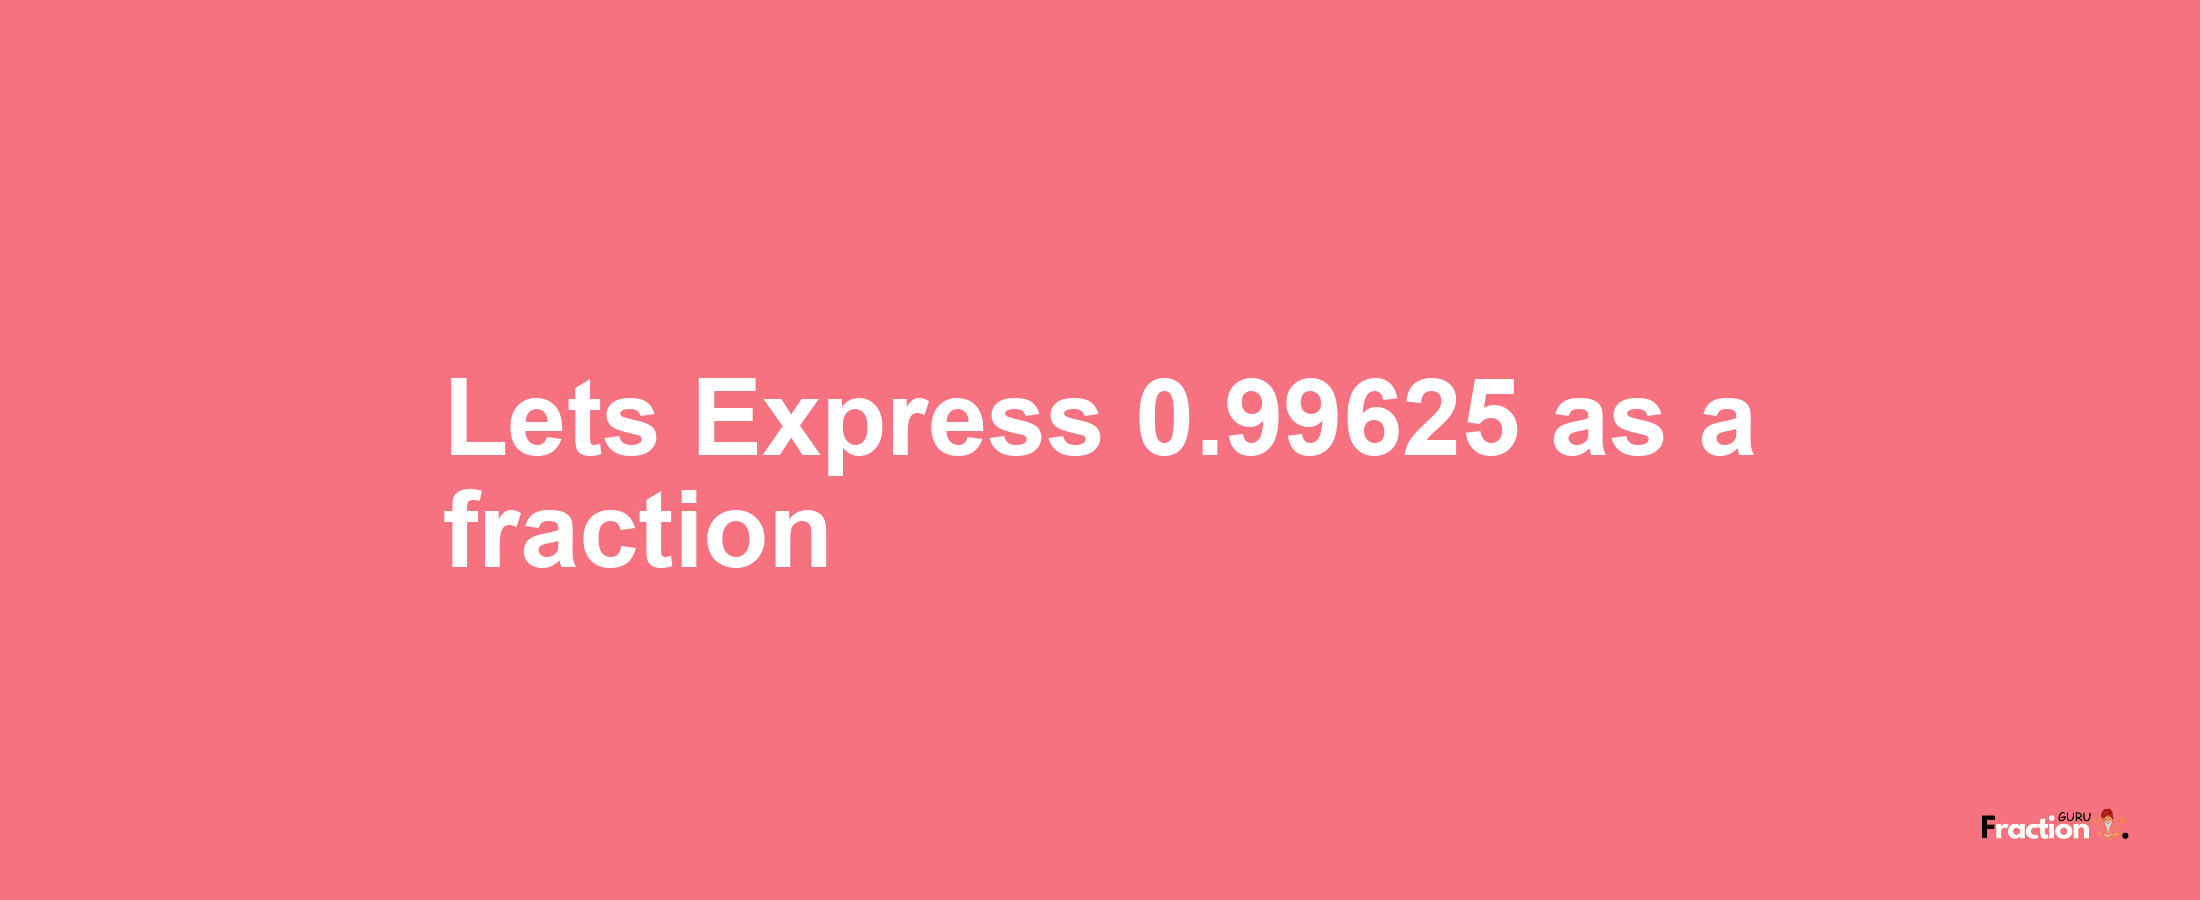 Lets Express 0.99625 as afraction